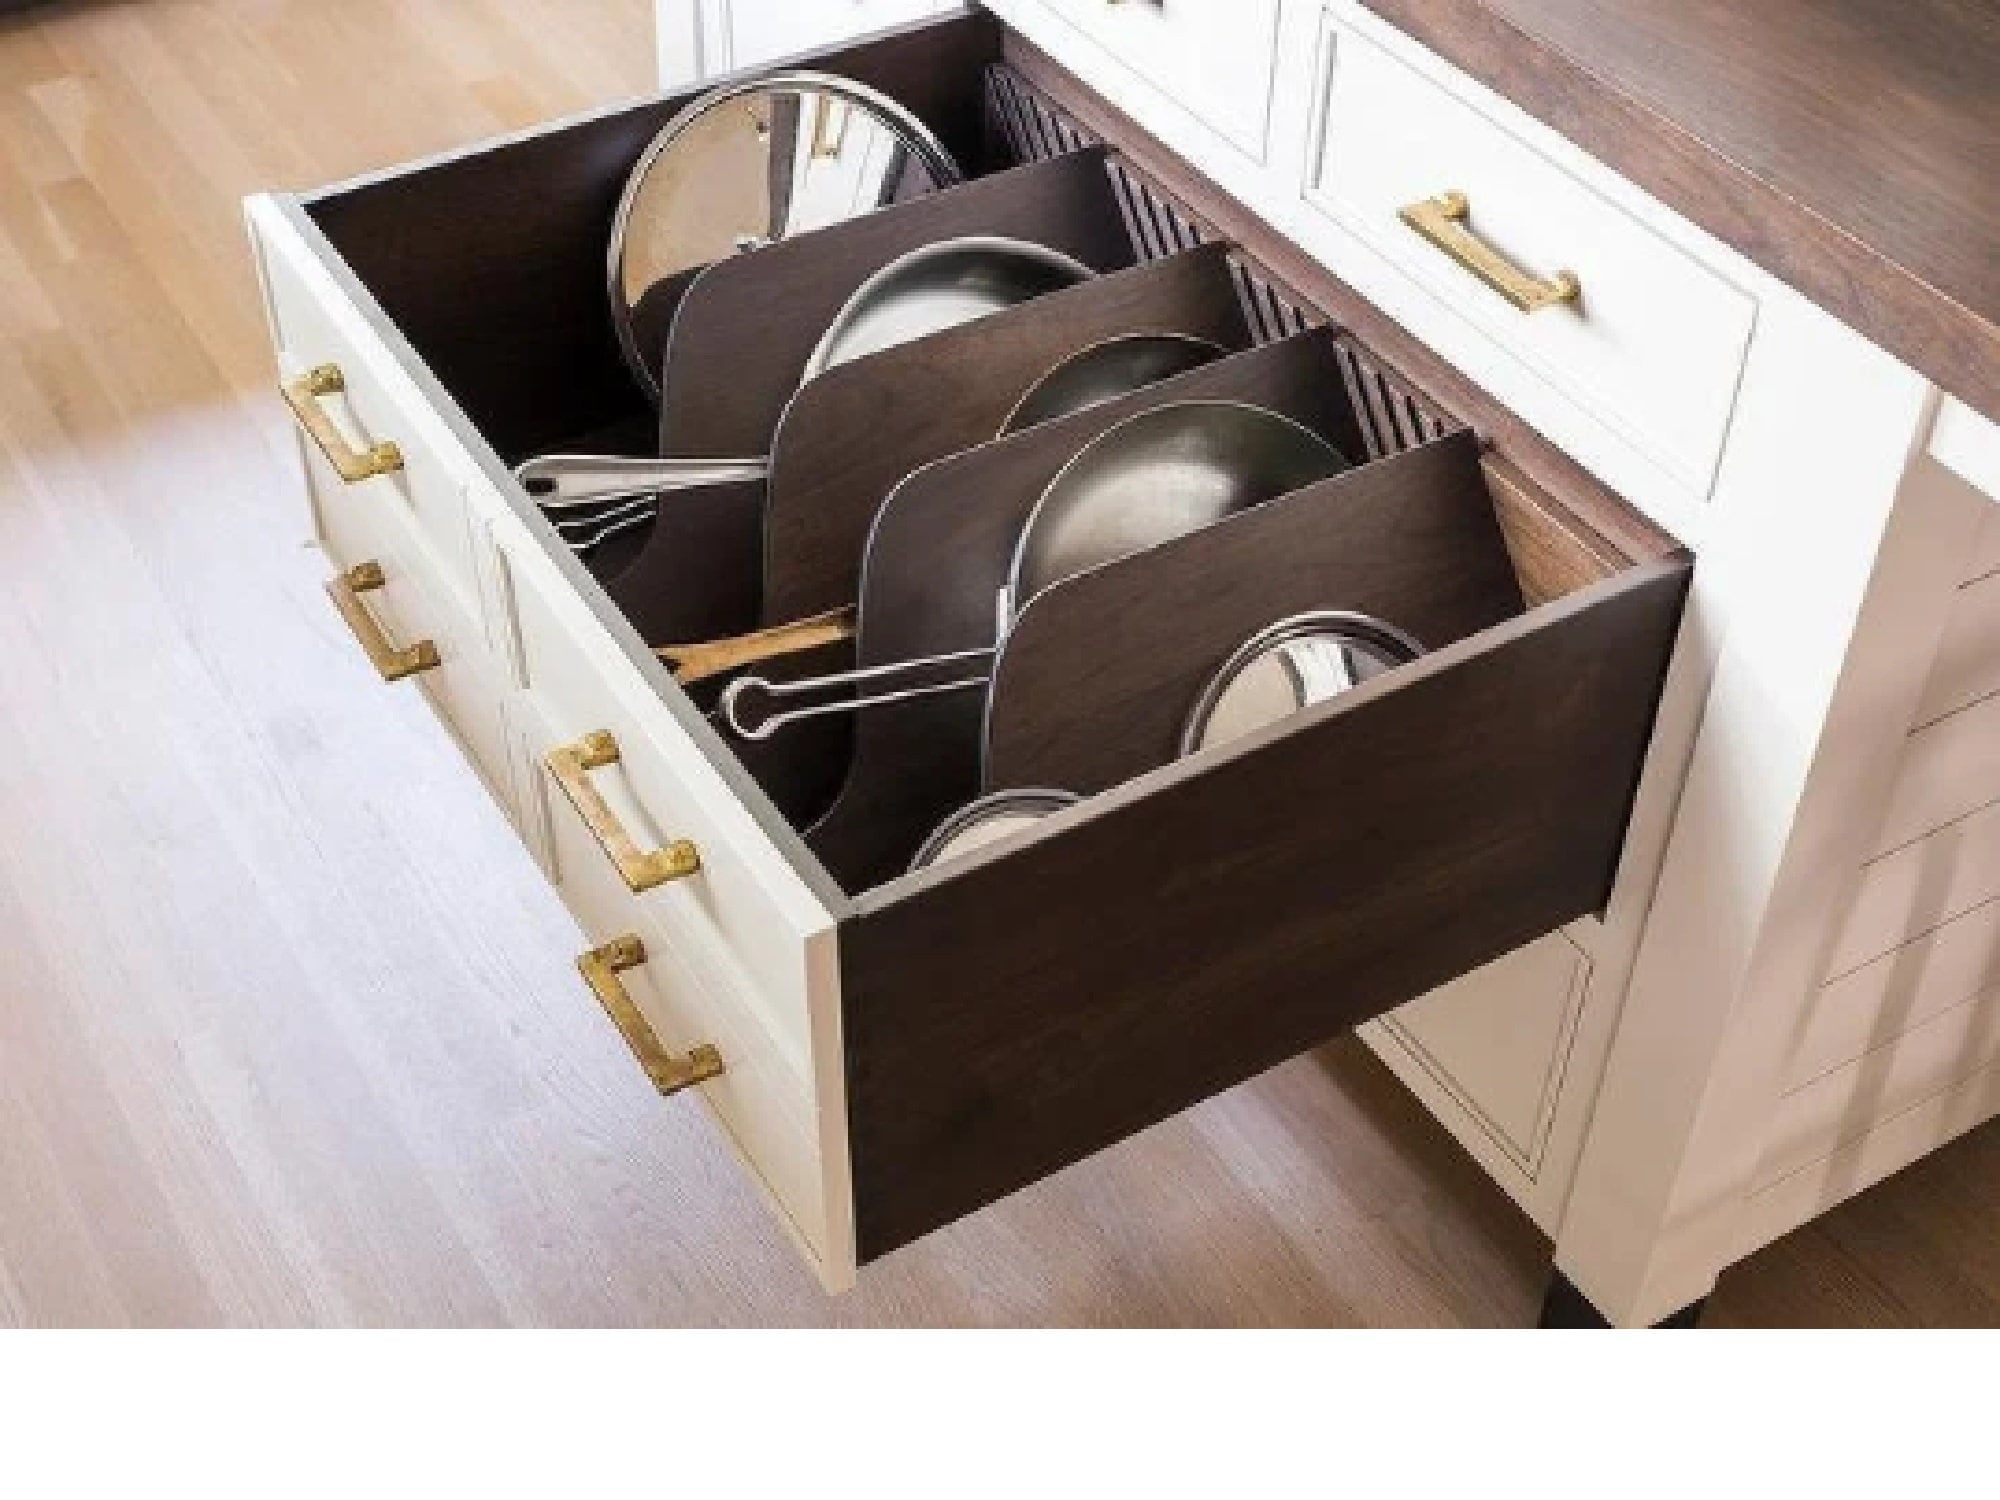 Pots & Pans and Tray Organizers